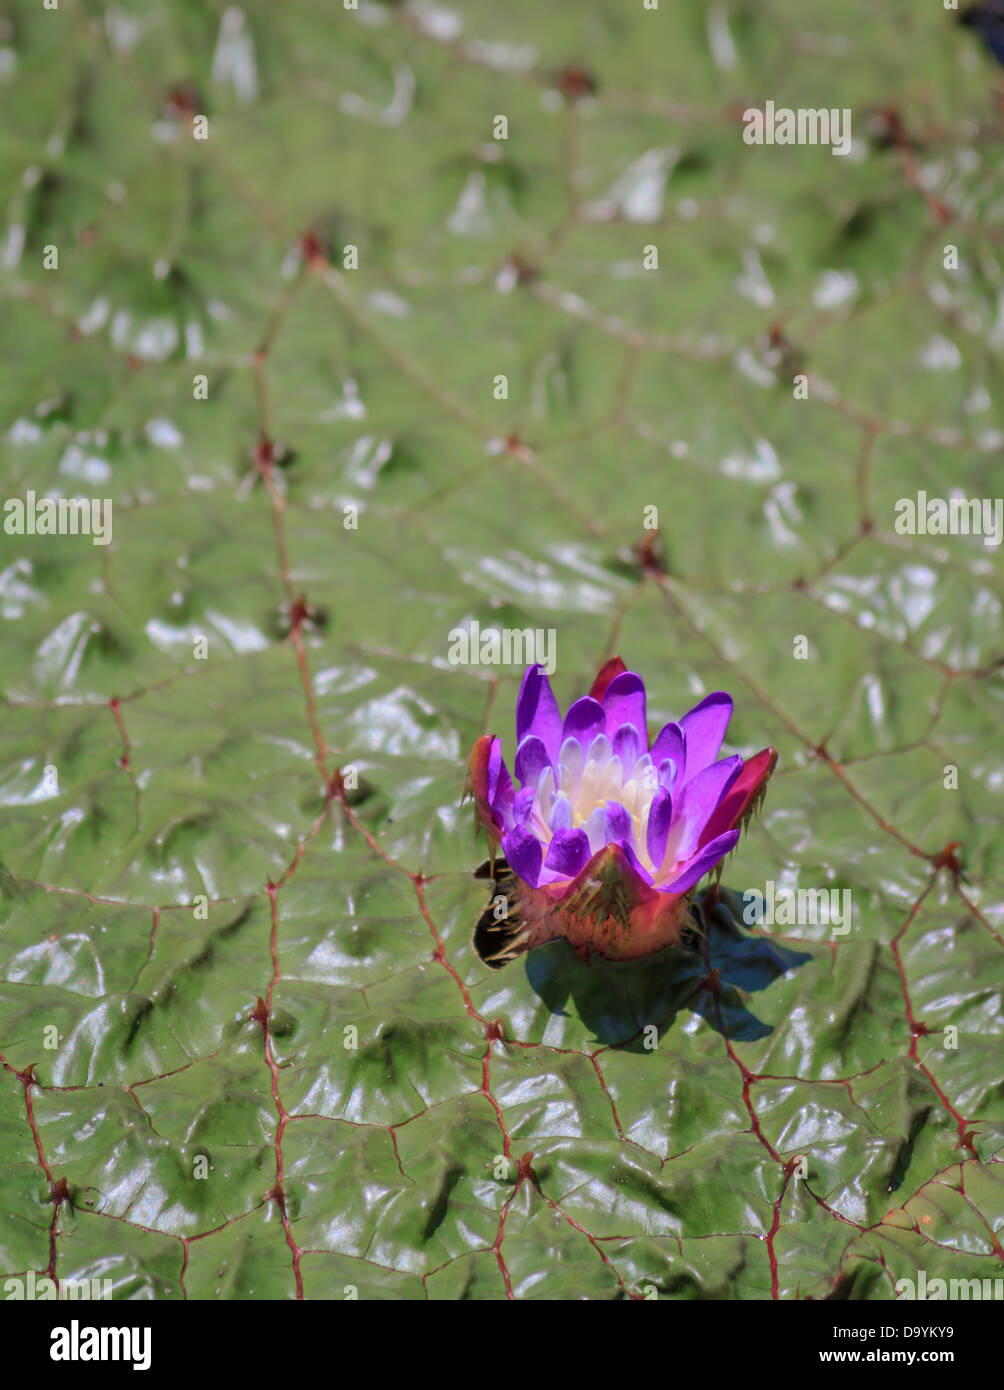 The prickly gorgon plant with a purple pink blossom Stock Photo